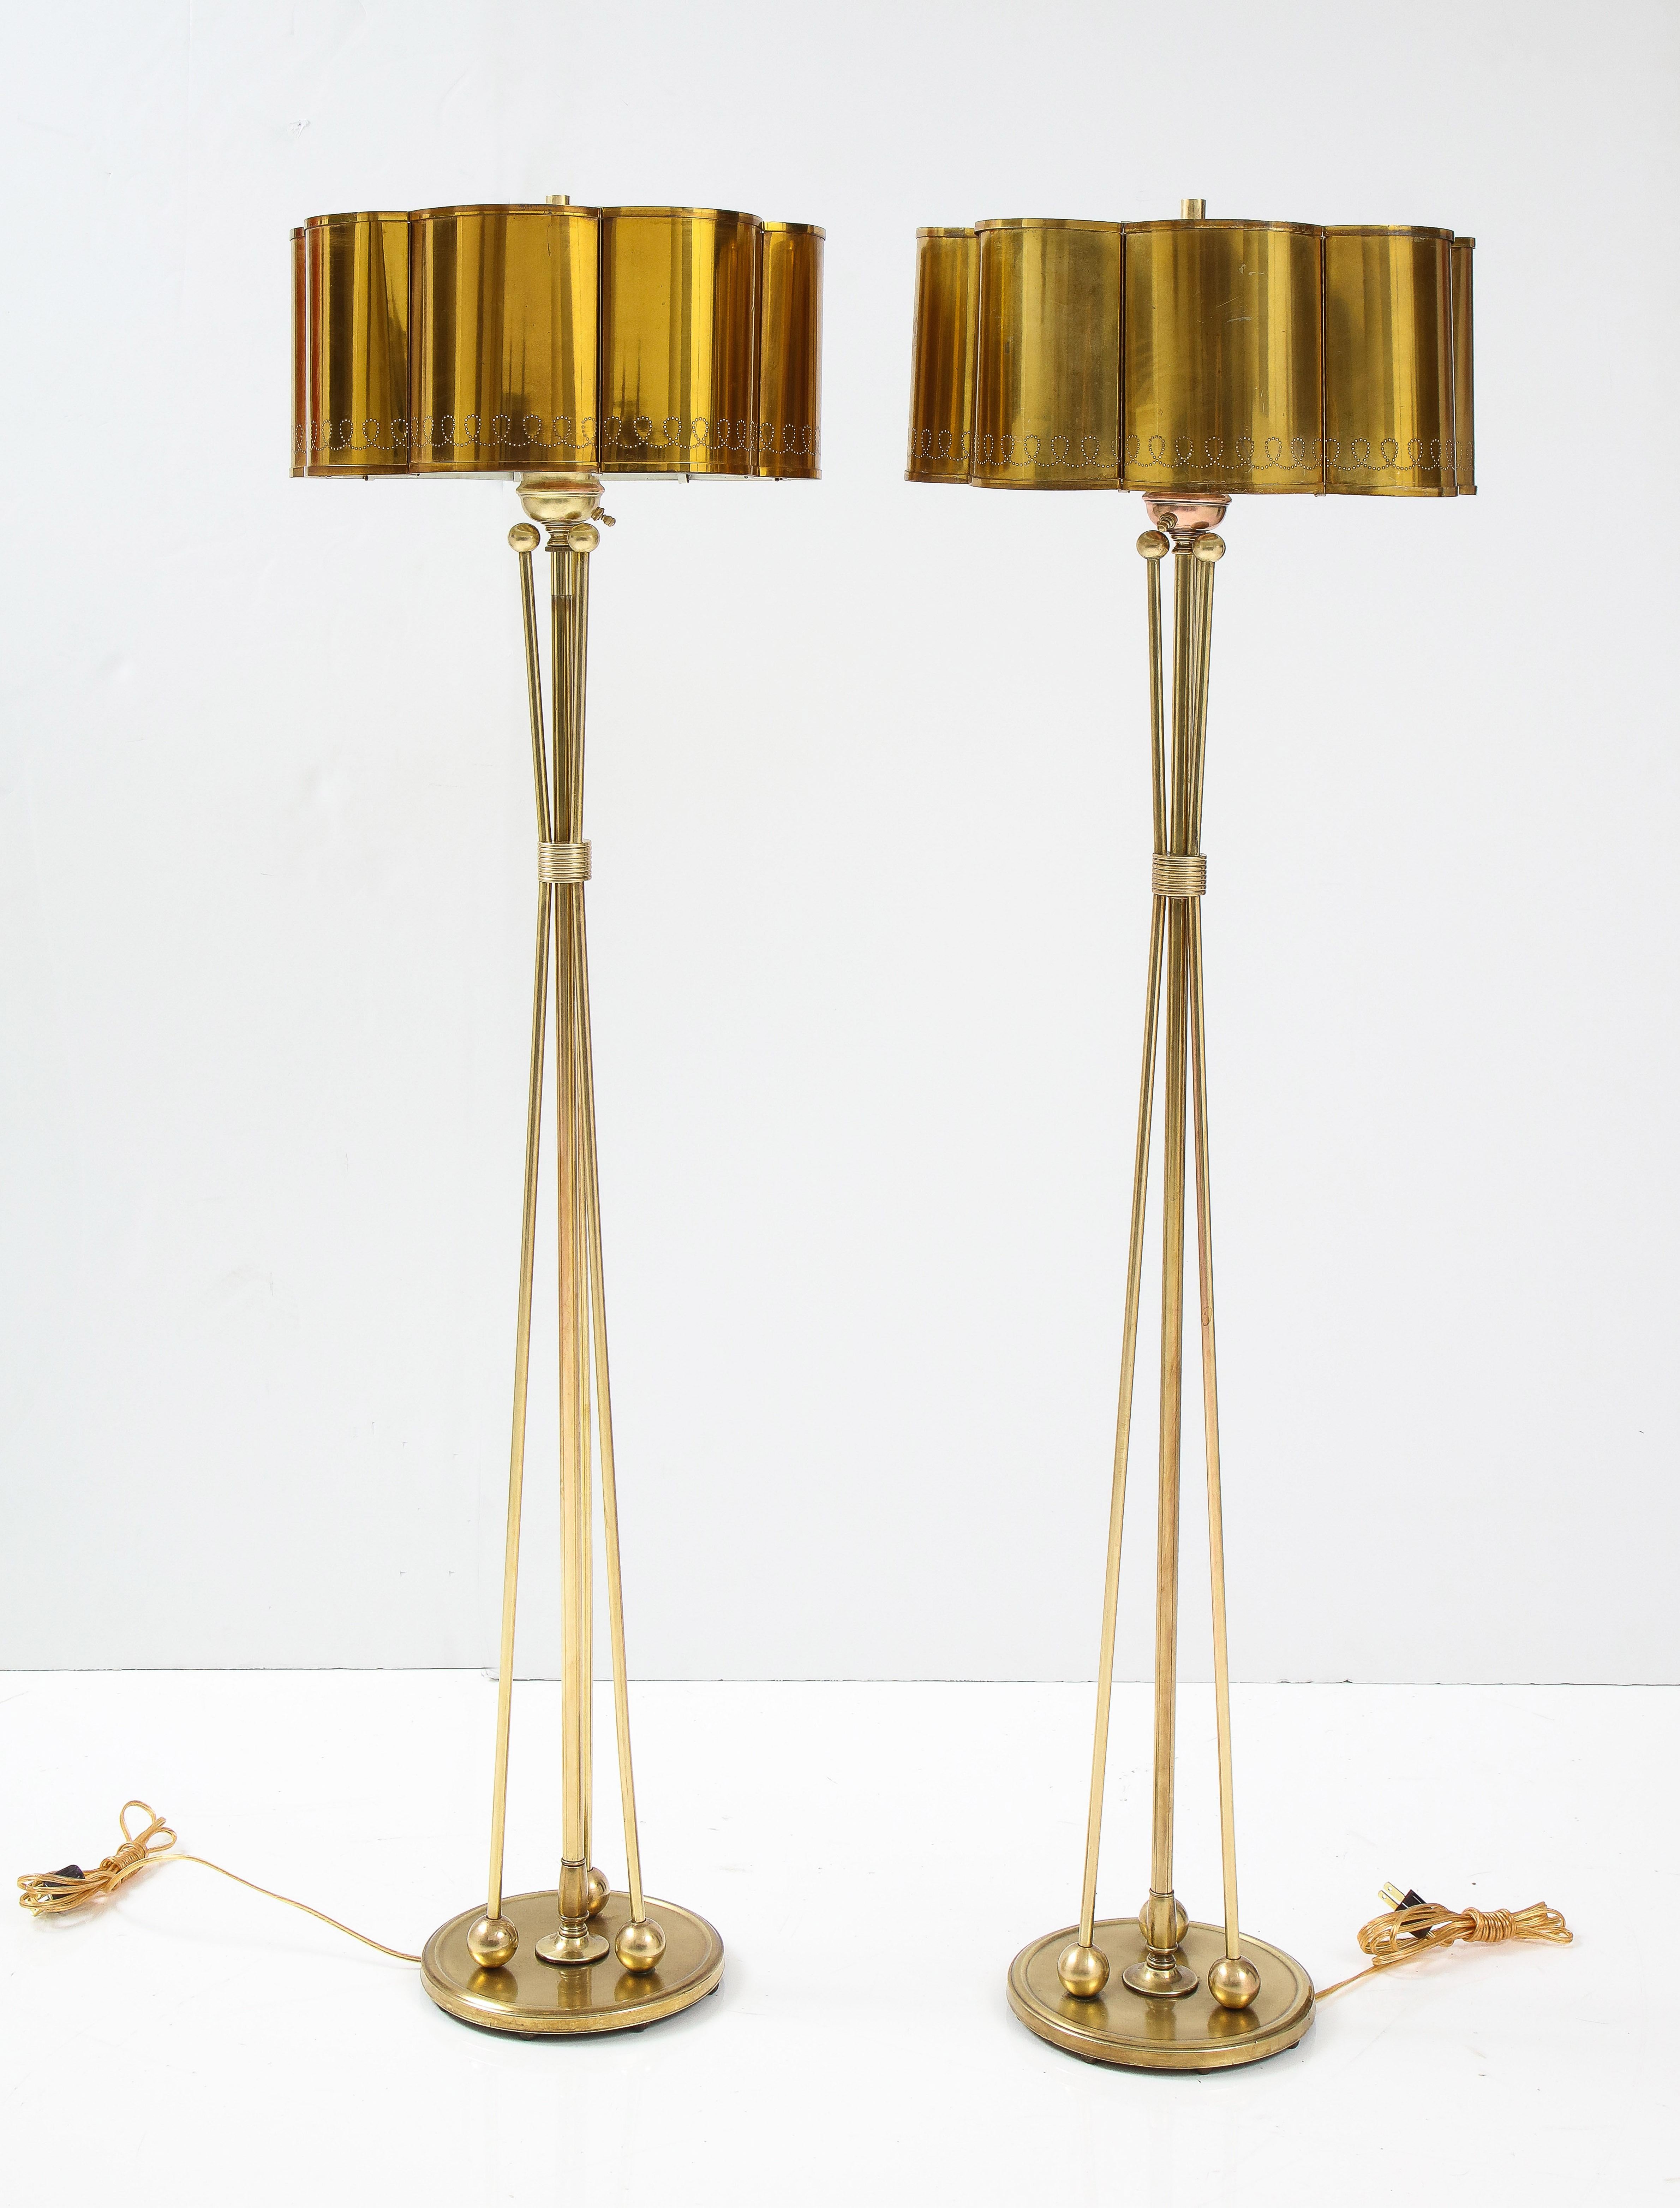 1950's French Solid Brass with Perforated Lamps Shades Tripod Floor Lamps 4